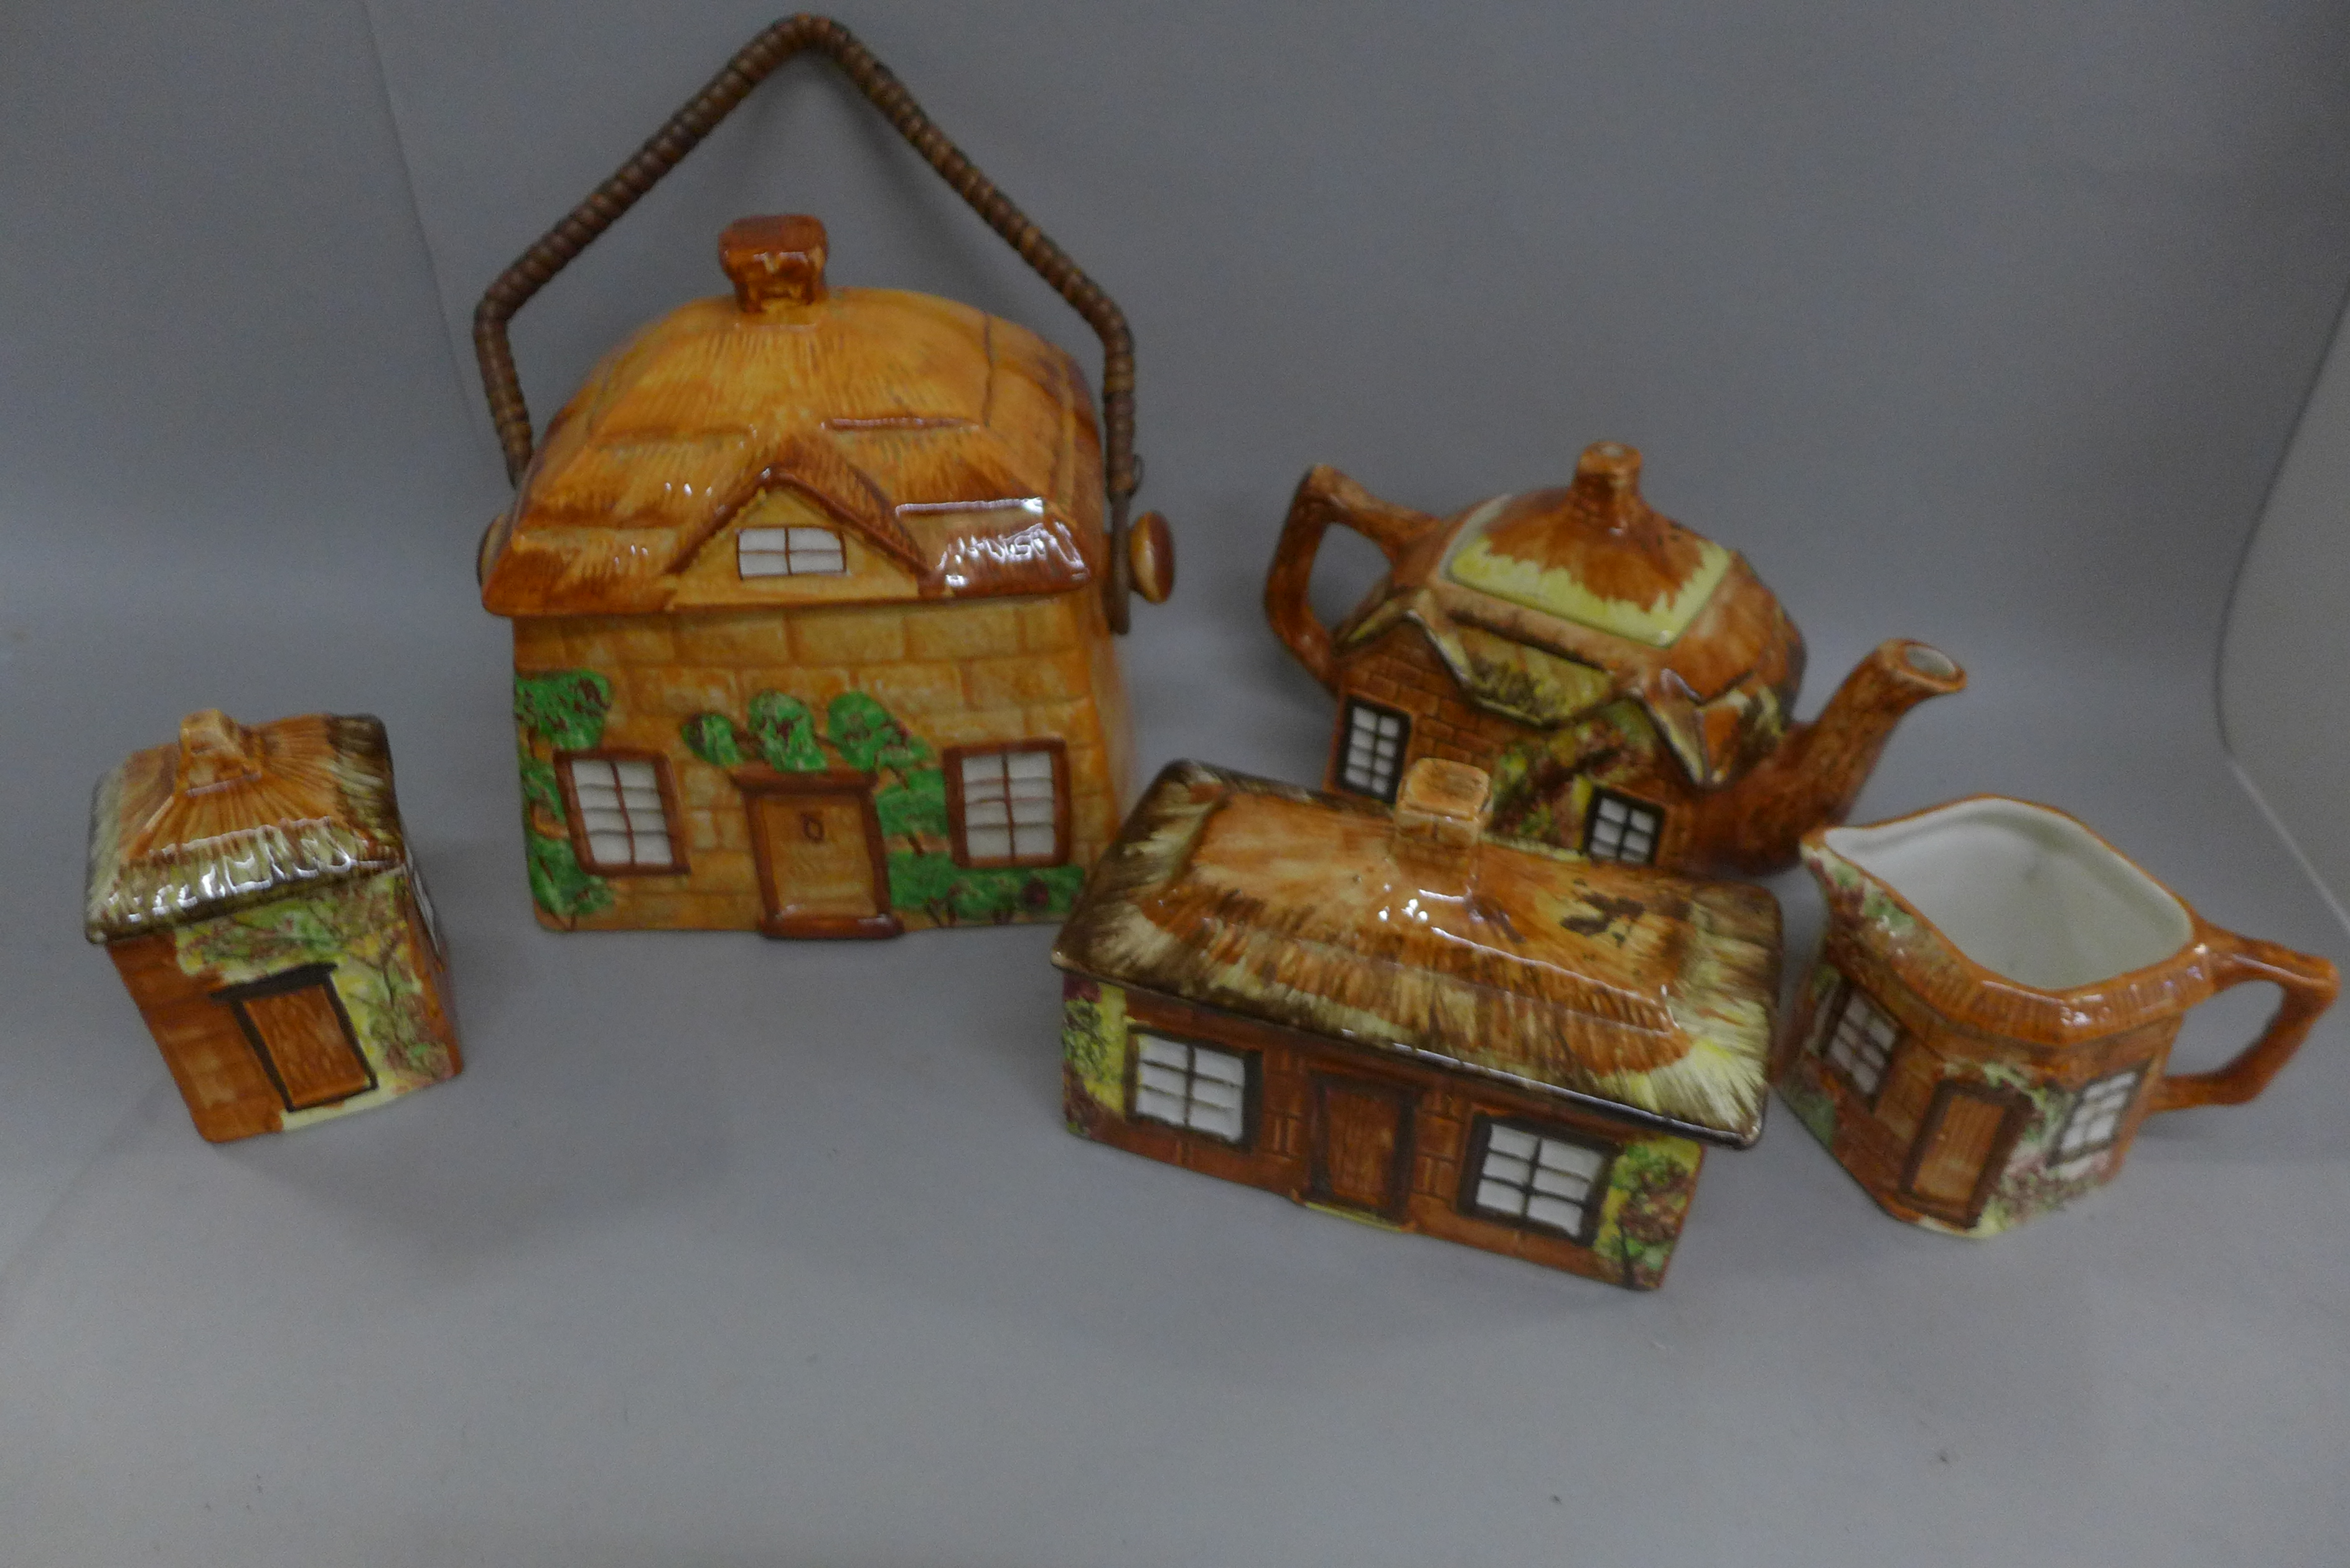 Price Kensington and other cottage ware china; biscuit barrel, butter dish, teapot, milk jug and